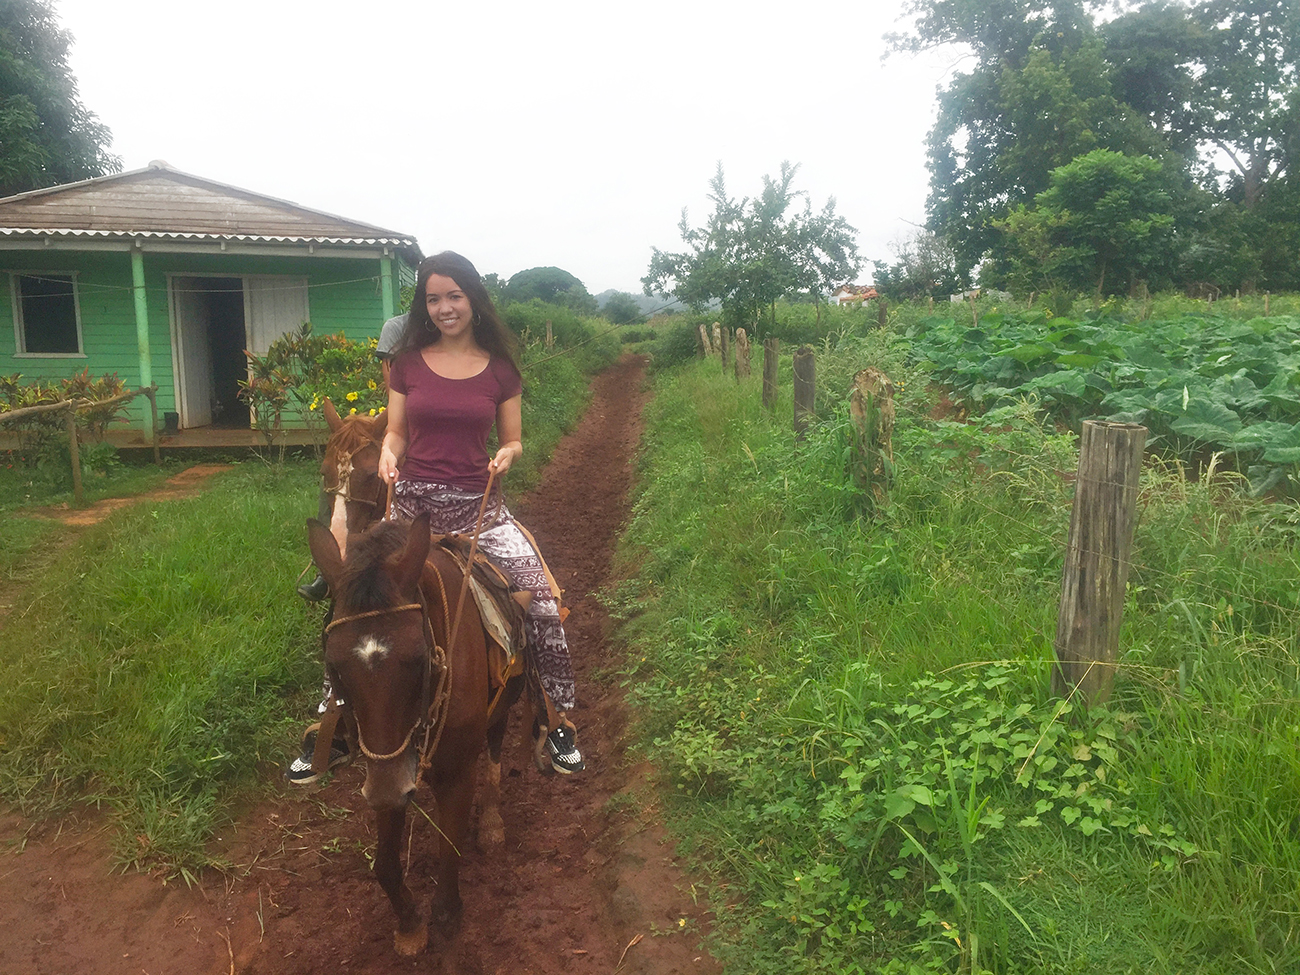 Horseback riding in Vinales - things to do in Cuba